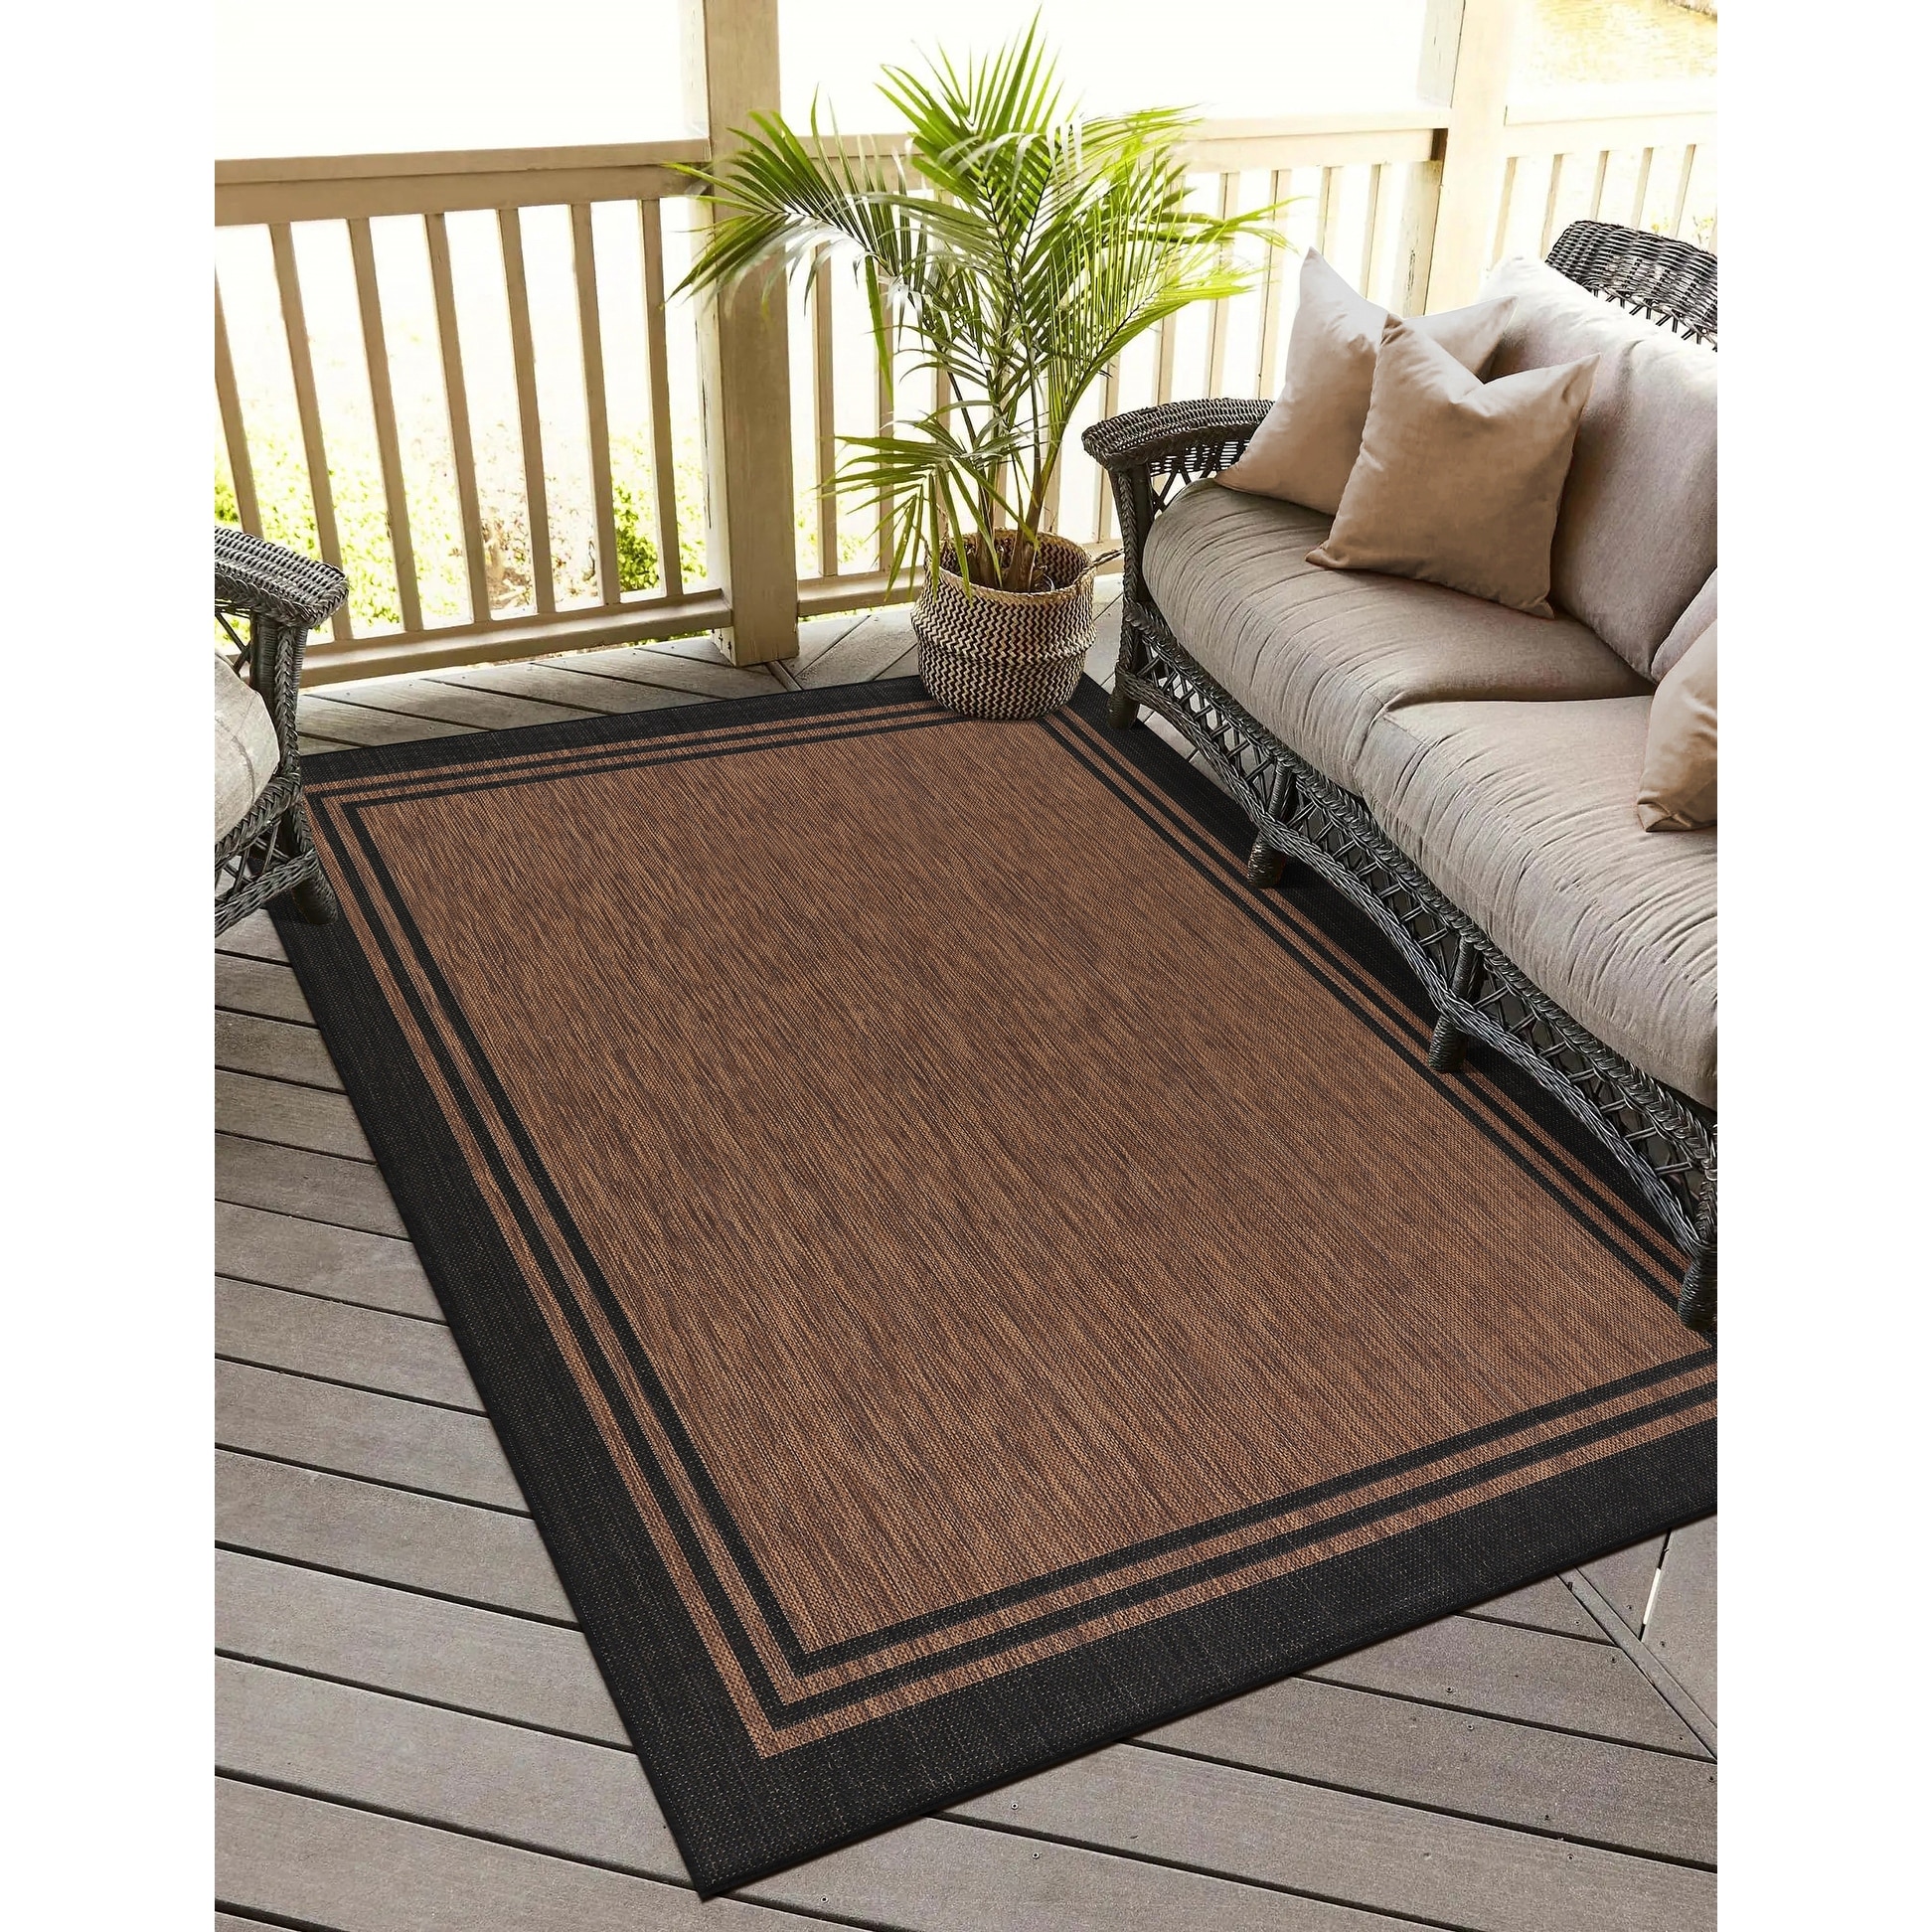 https://ak1.ostkcdn.com/images/products/is/images/direct/9868f221605661edb27b8f00b5443e9ed286425a/Washable-Bordered-Indoor-Outdoor-Rug%2C-Outside-Carpet-for-Patio%2C-Deck%2C-Porch.jpg